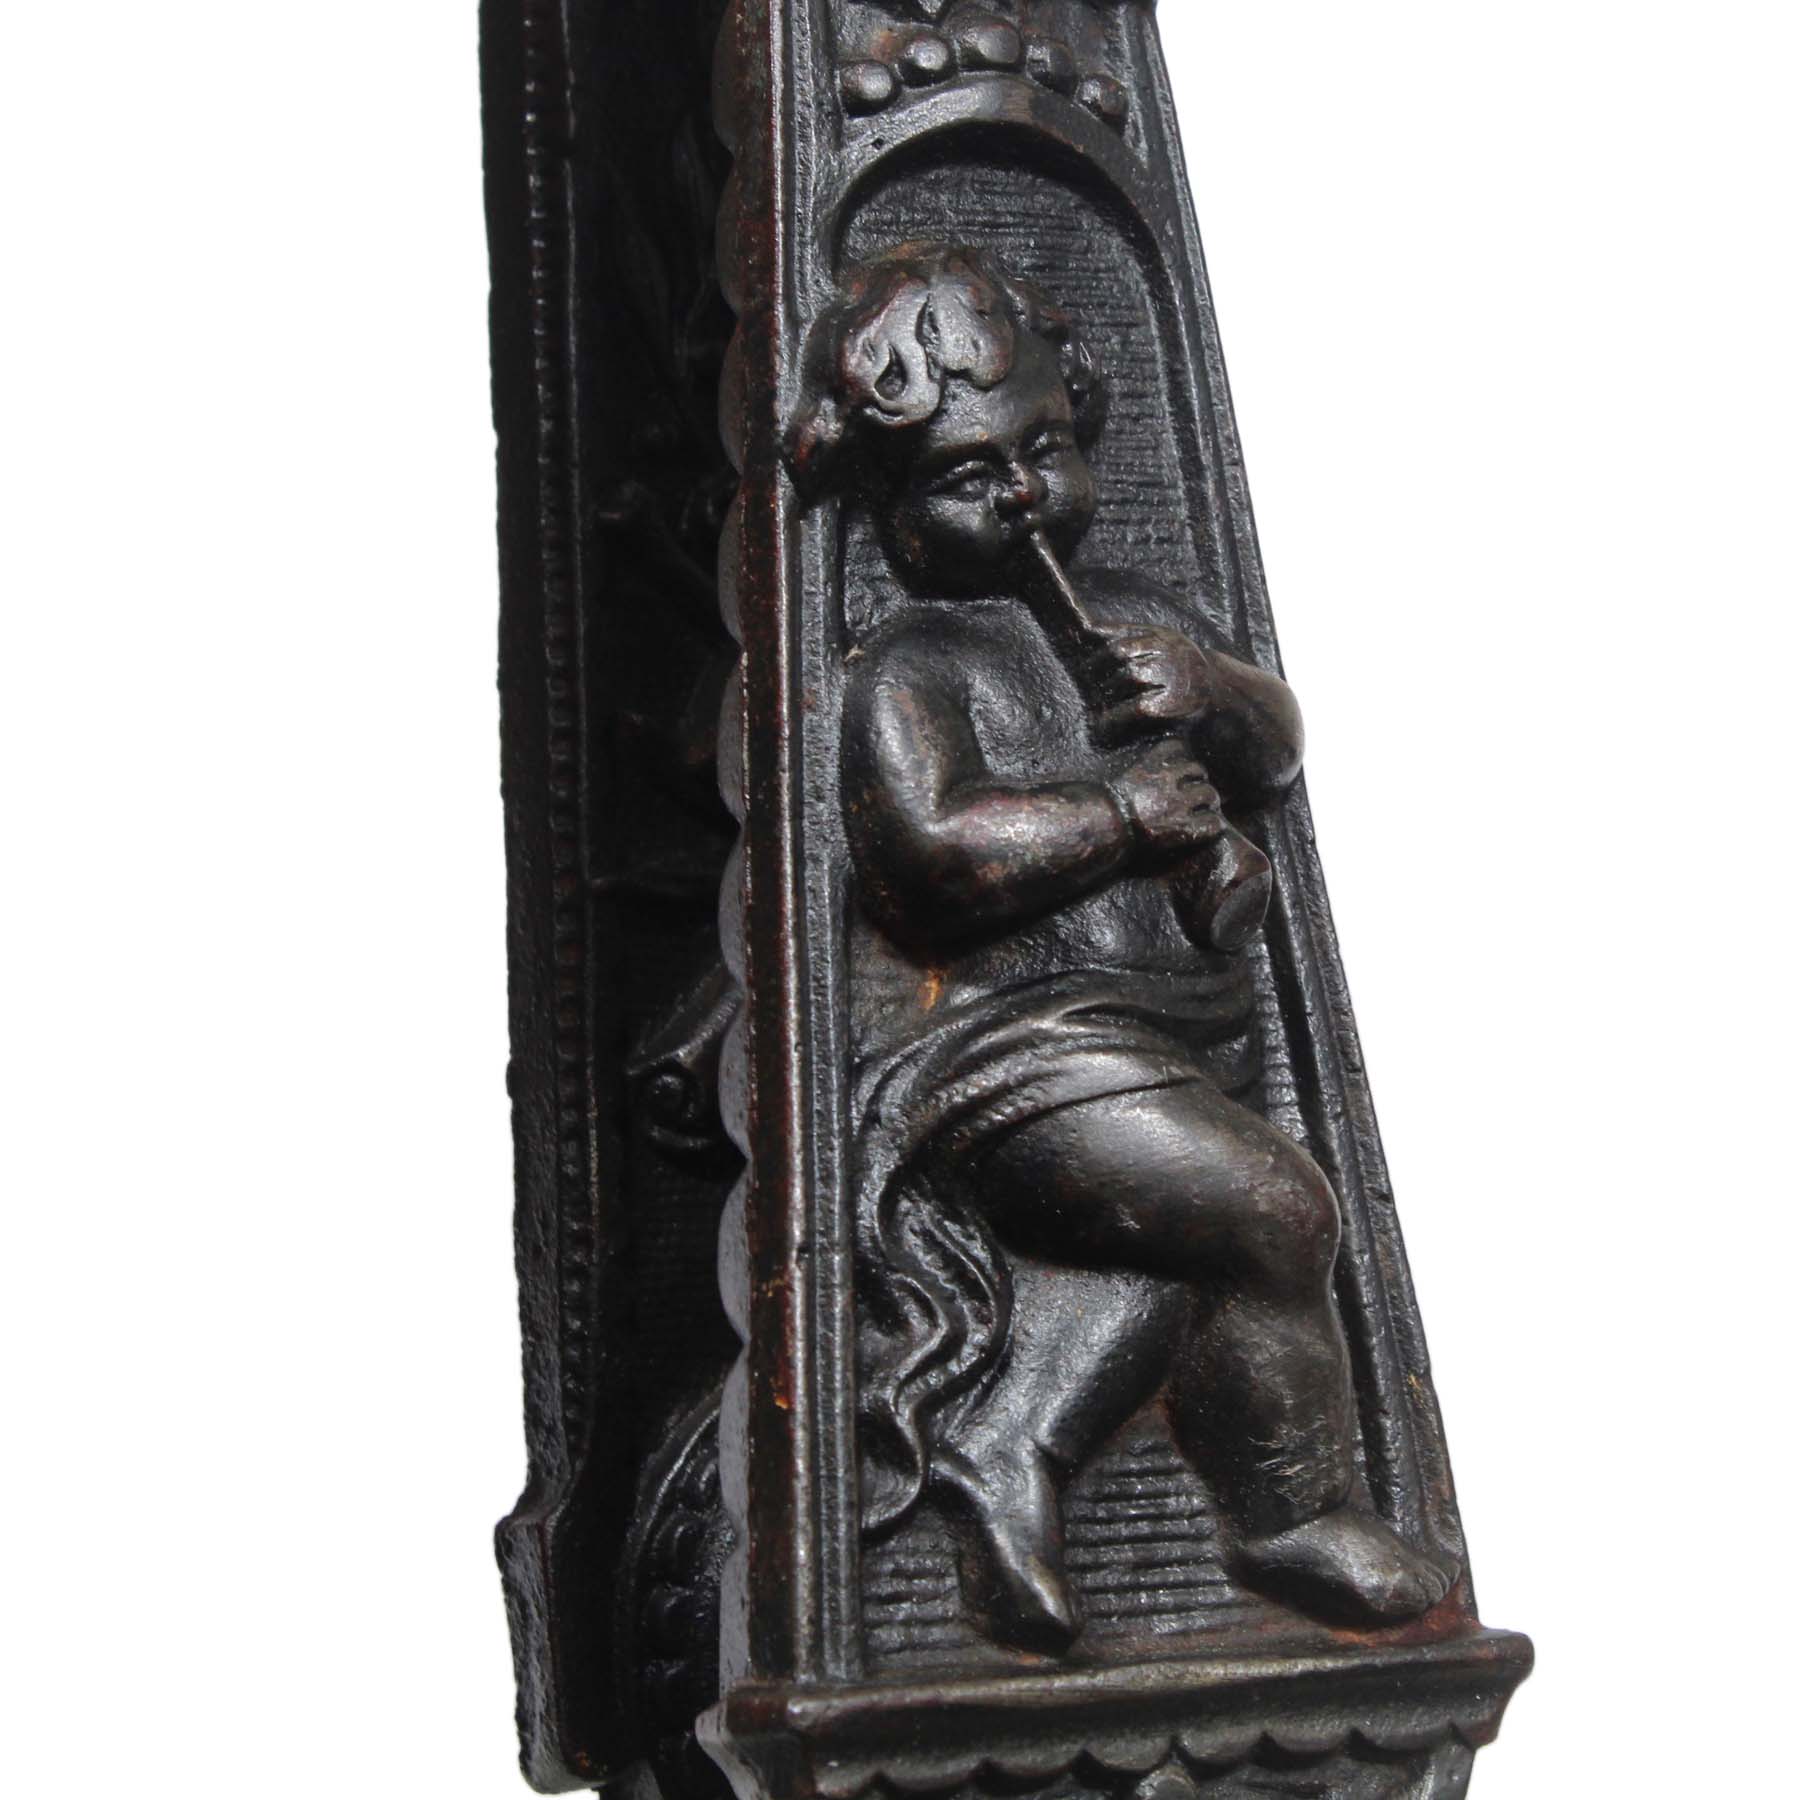 SOLD Antique Cast Iron Figural Door Knocker by A. Kenrick & Sons-70474